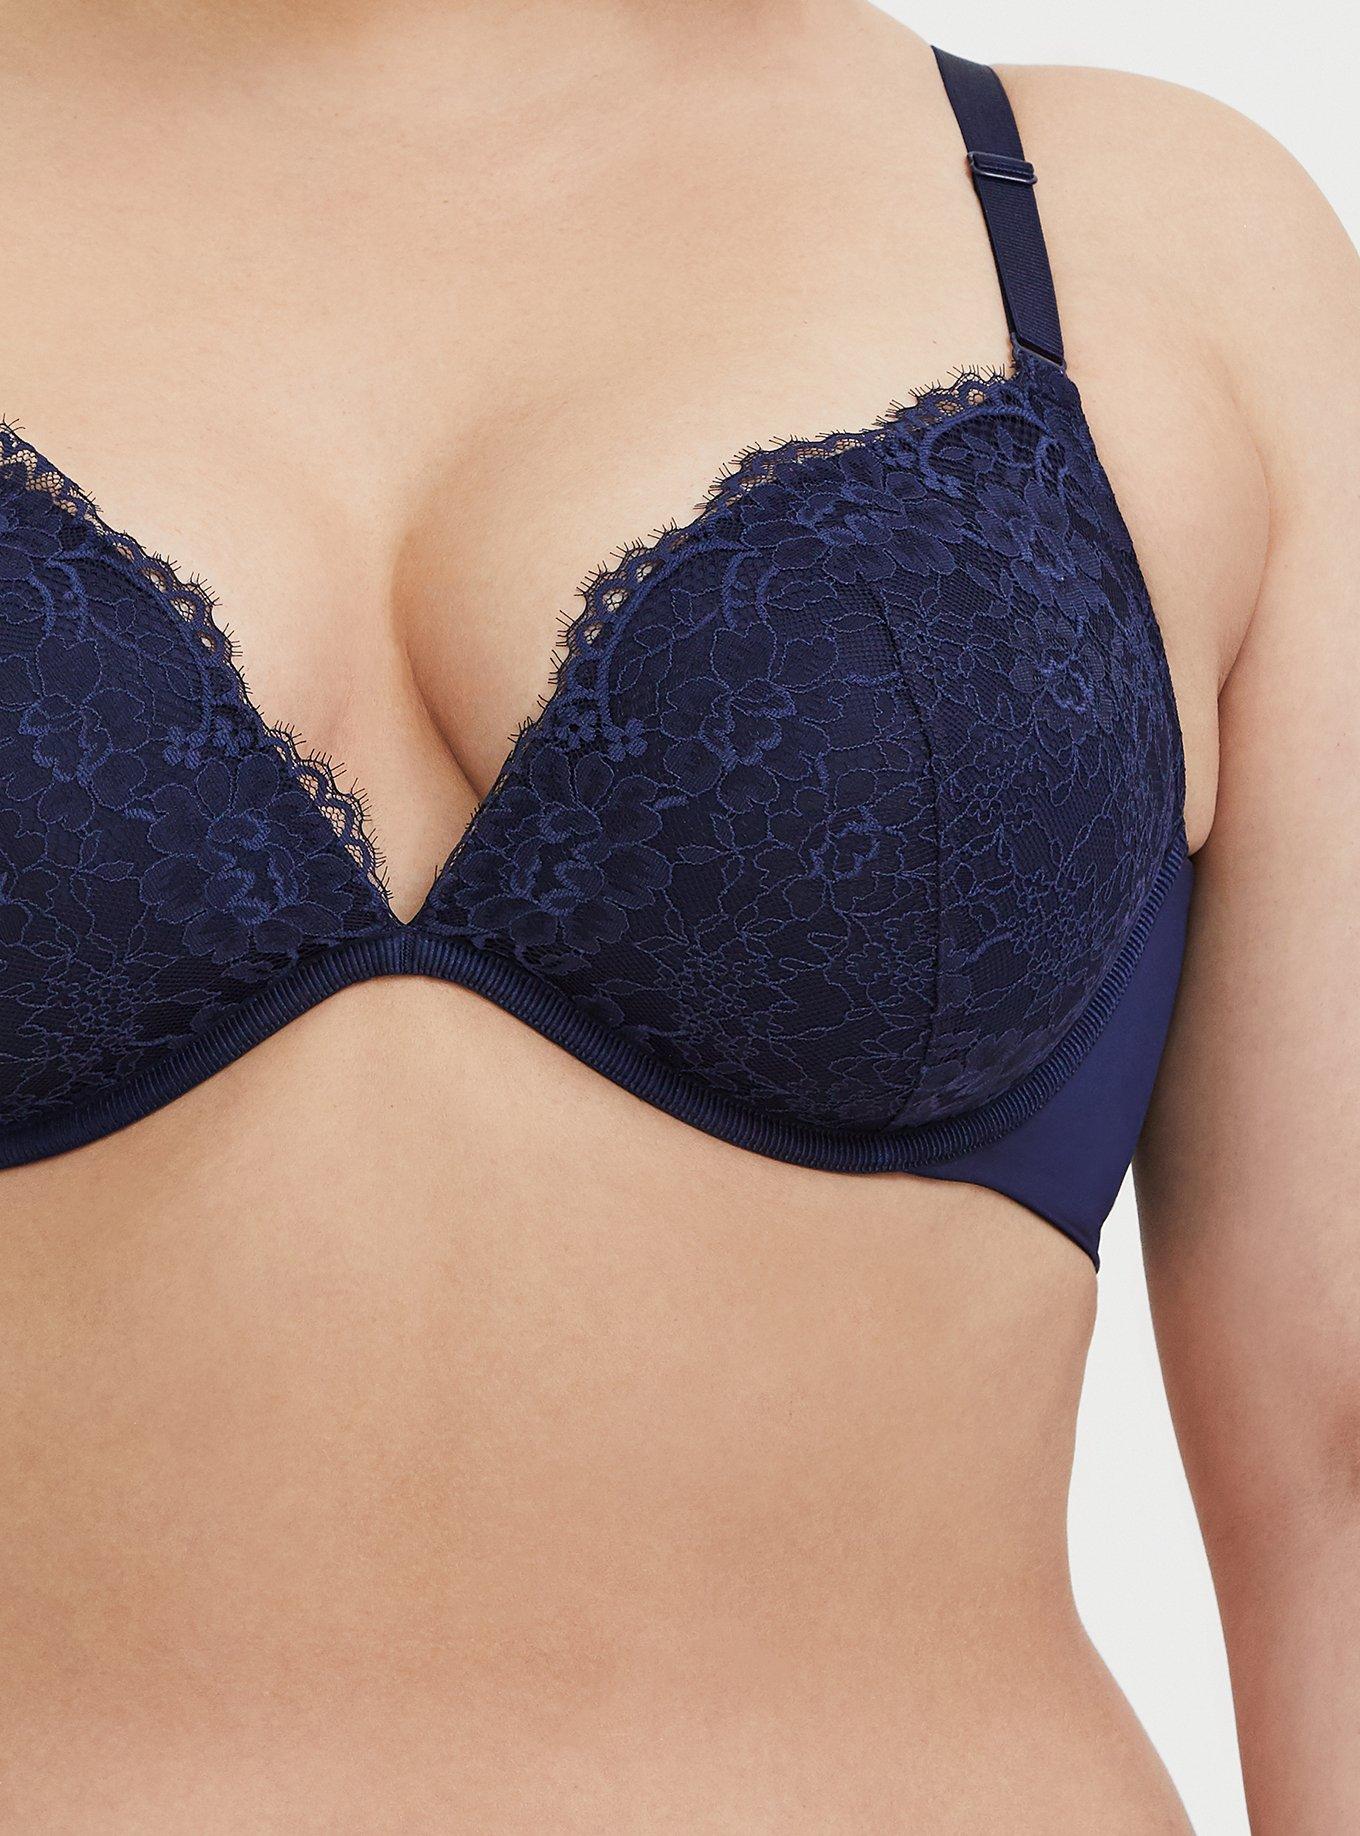 Torrid - Our 360° Back Smoothing Bra is perfection! Select